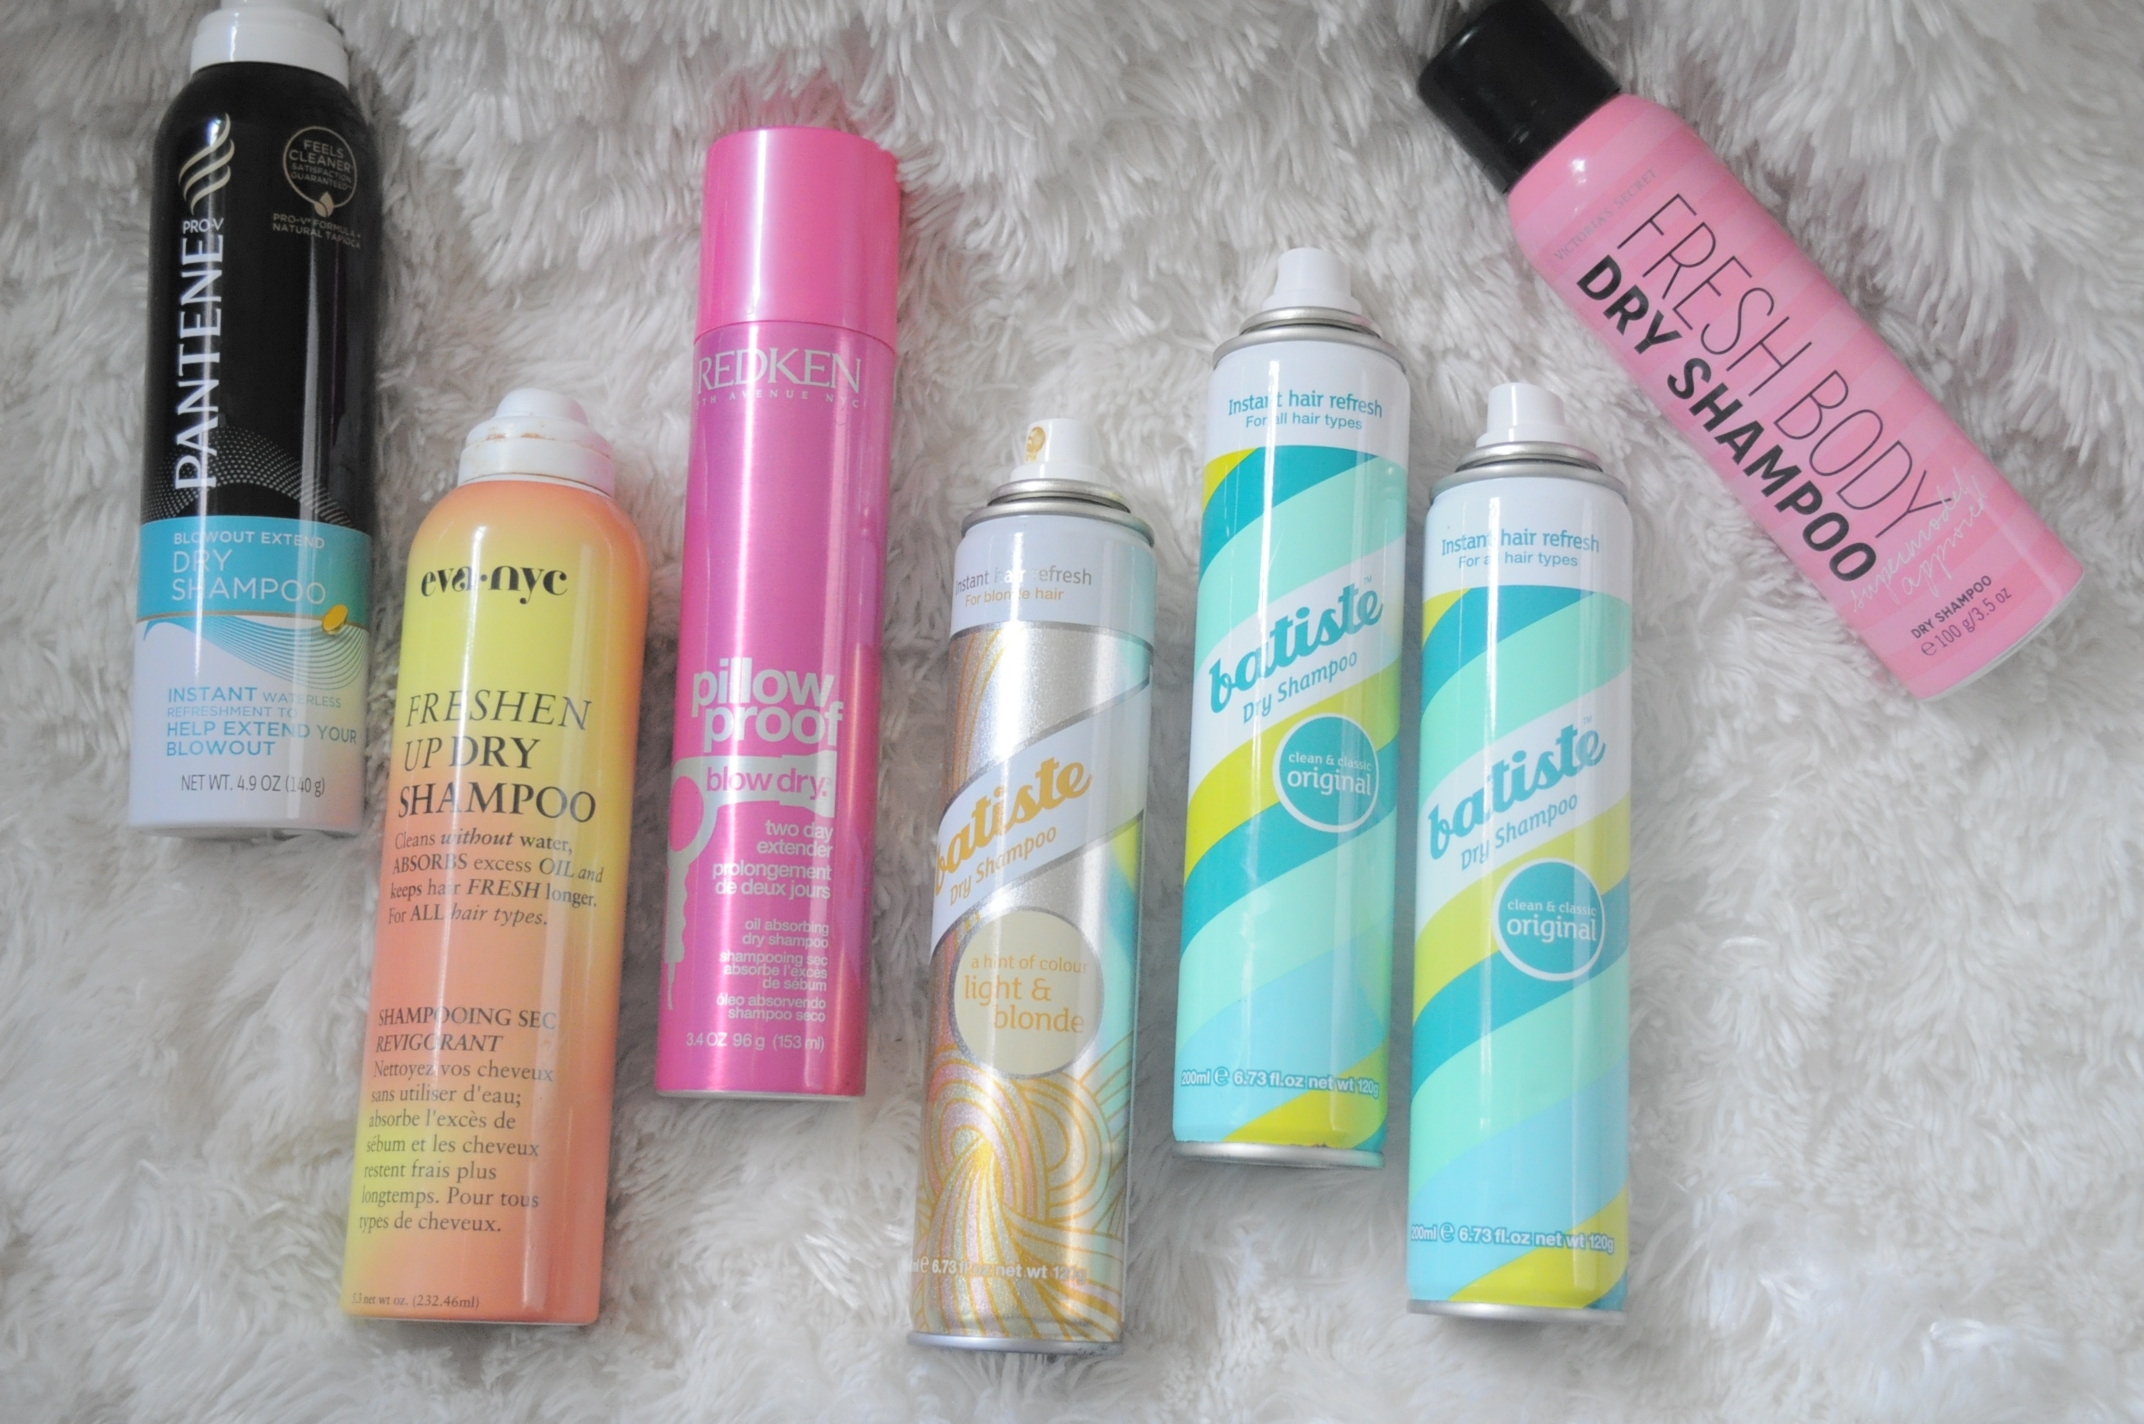 Dry Shampoo - Review of some of the most popular brands